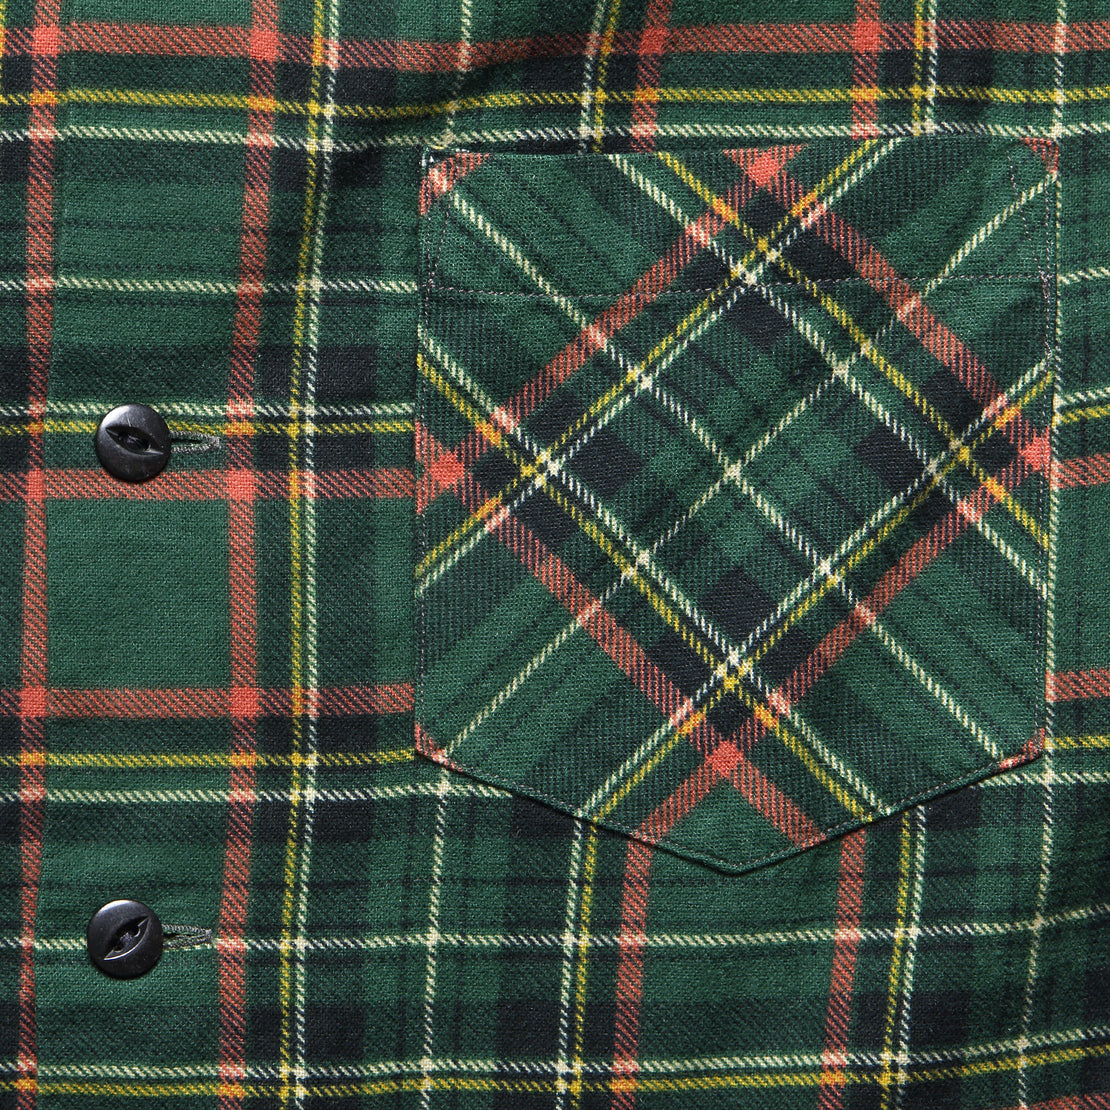 Rodgers Flannel Overshirt - Green - RRL - STAG Provisions - Tops - L/S Woven - Plaid